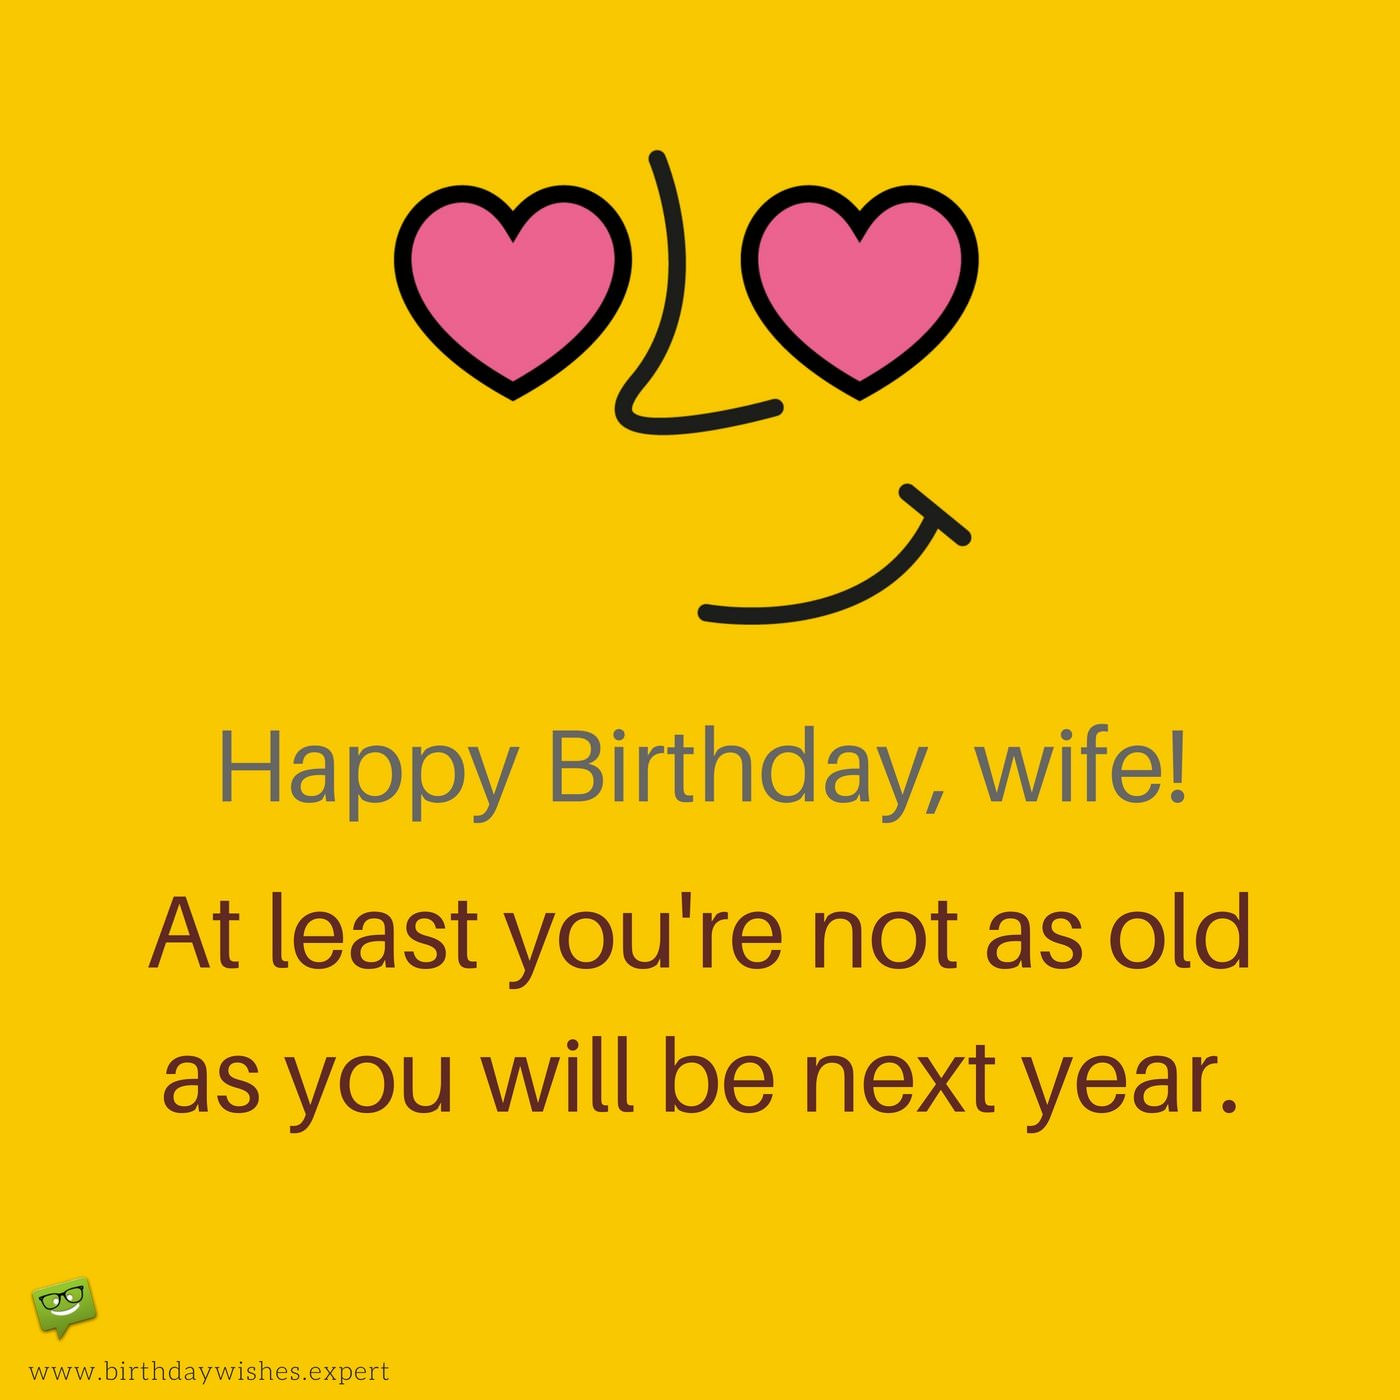 Birthday Wishes Funny
 The Funniest Wishes to Make your Wife Smile on her Birthday